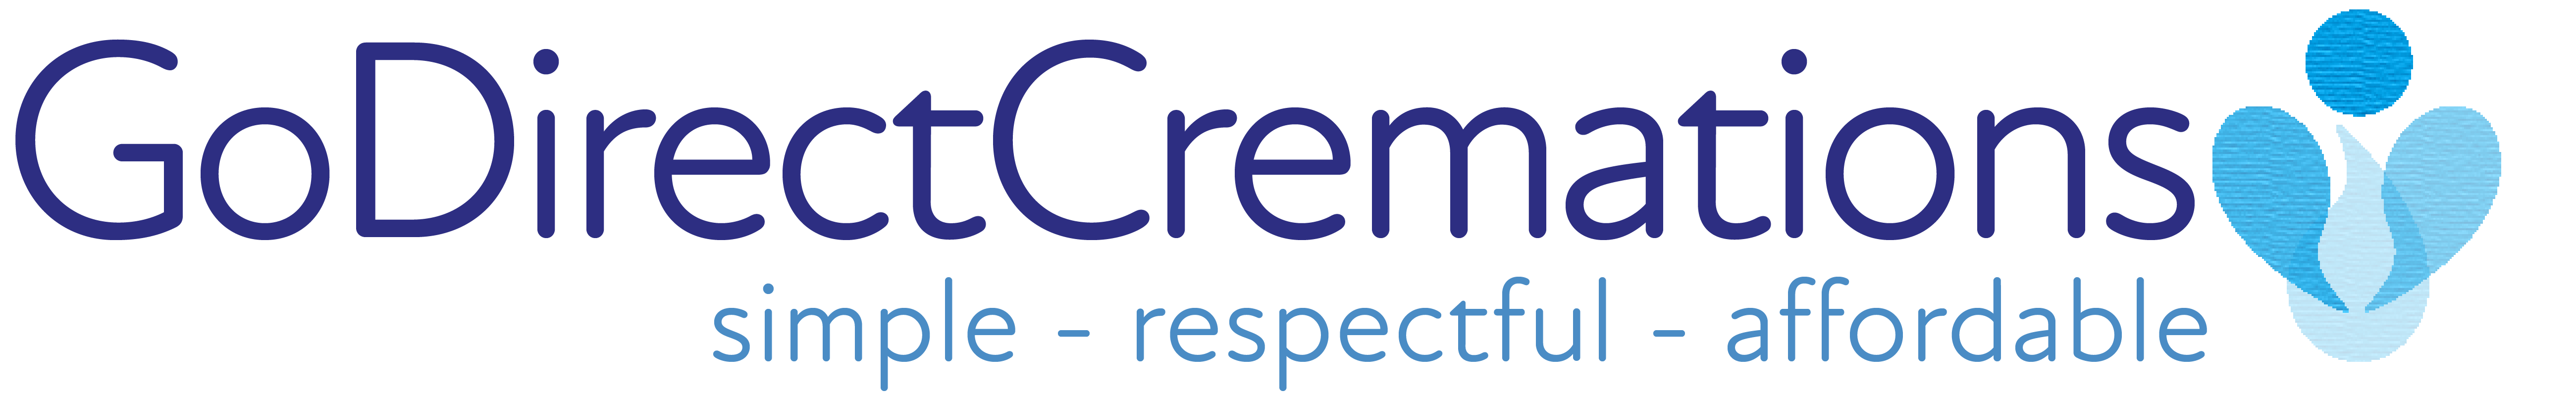 Low Cost Funerals - Go Direct Cremations